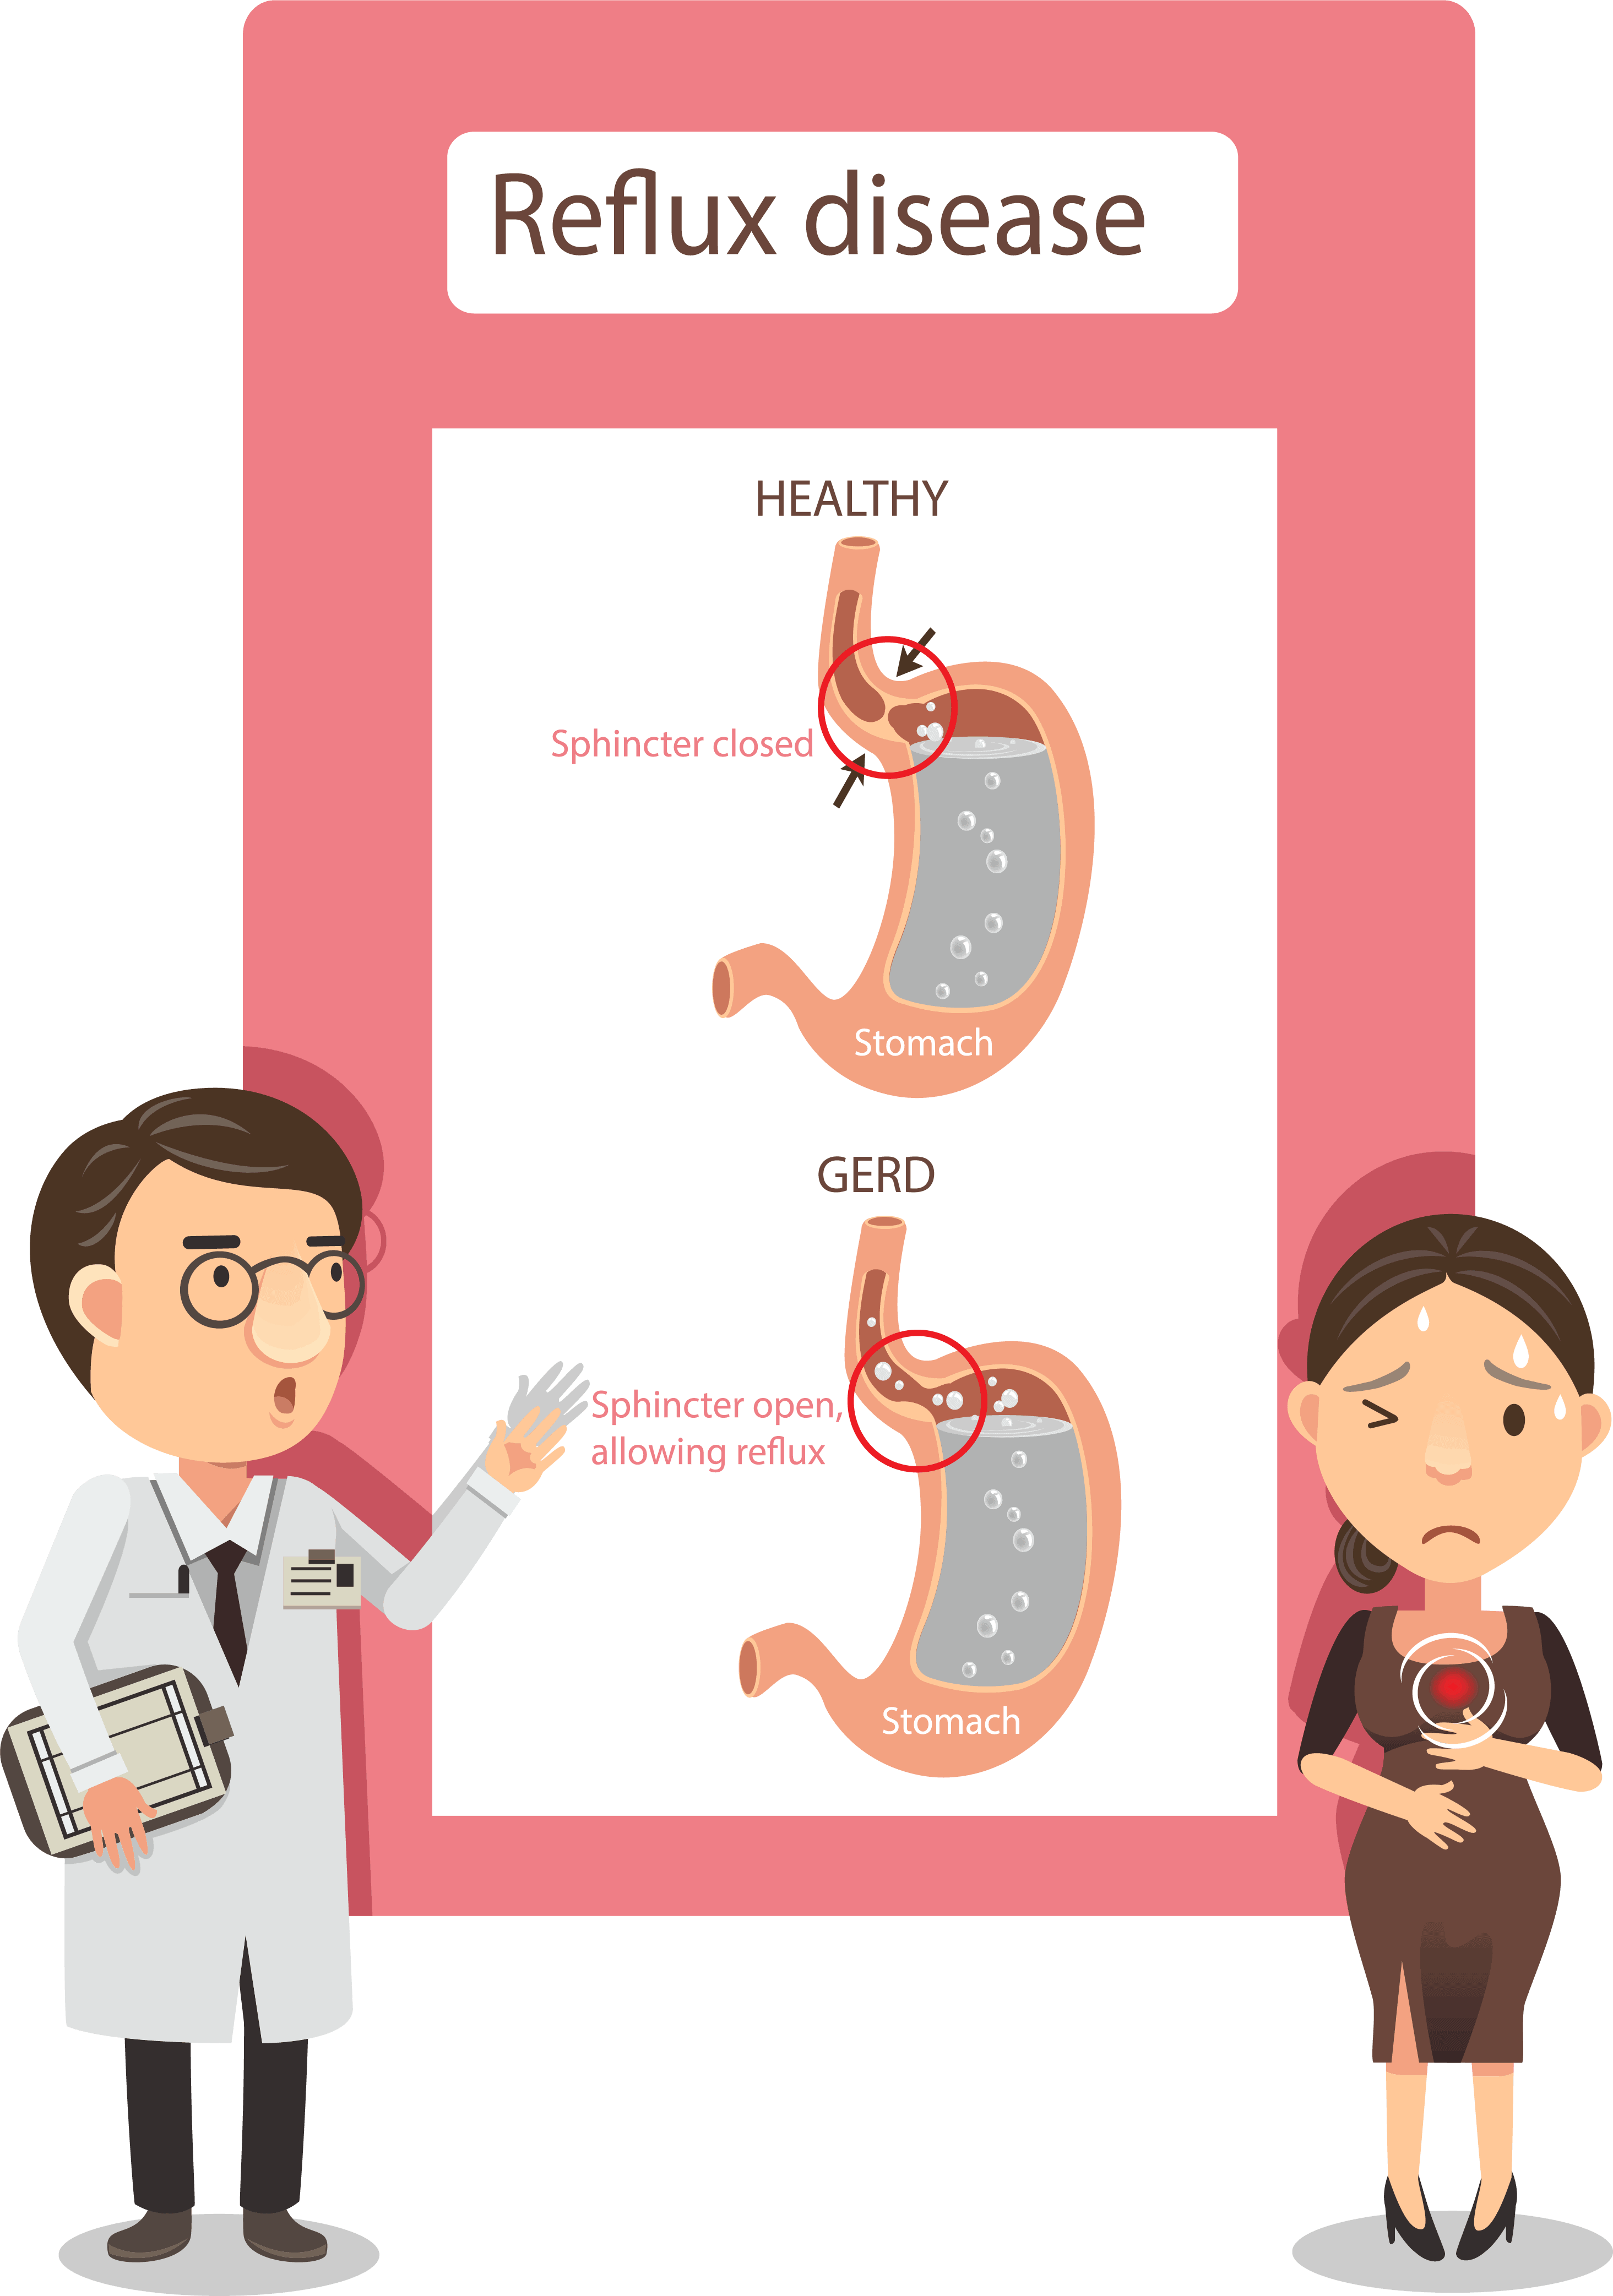 Educational illustration comparing healthy esophagus and GERD.